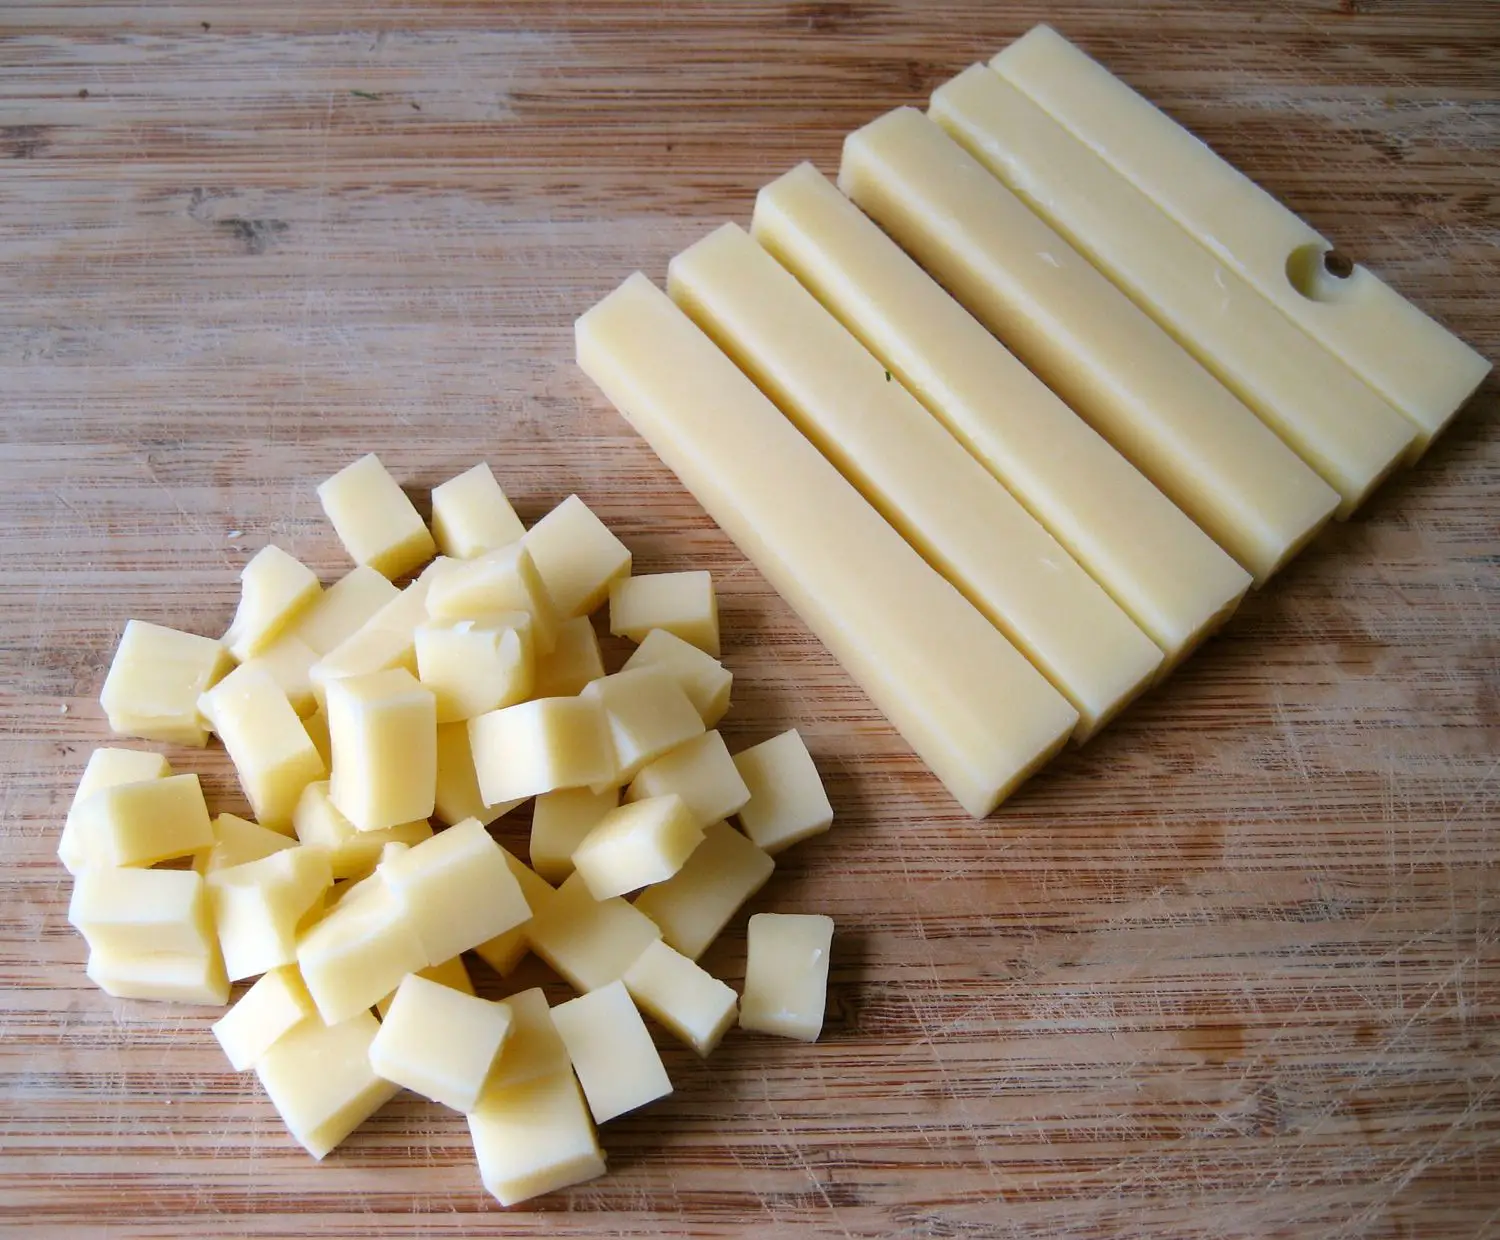 Asiago cheese Facts and Nutritional Value